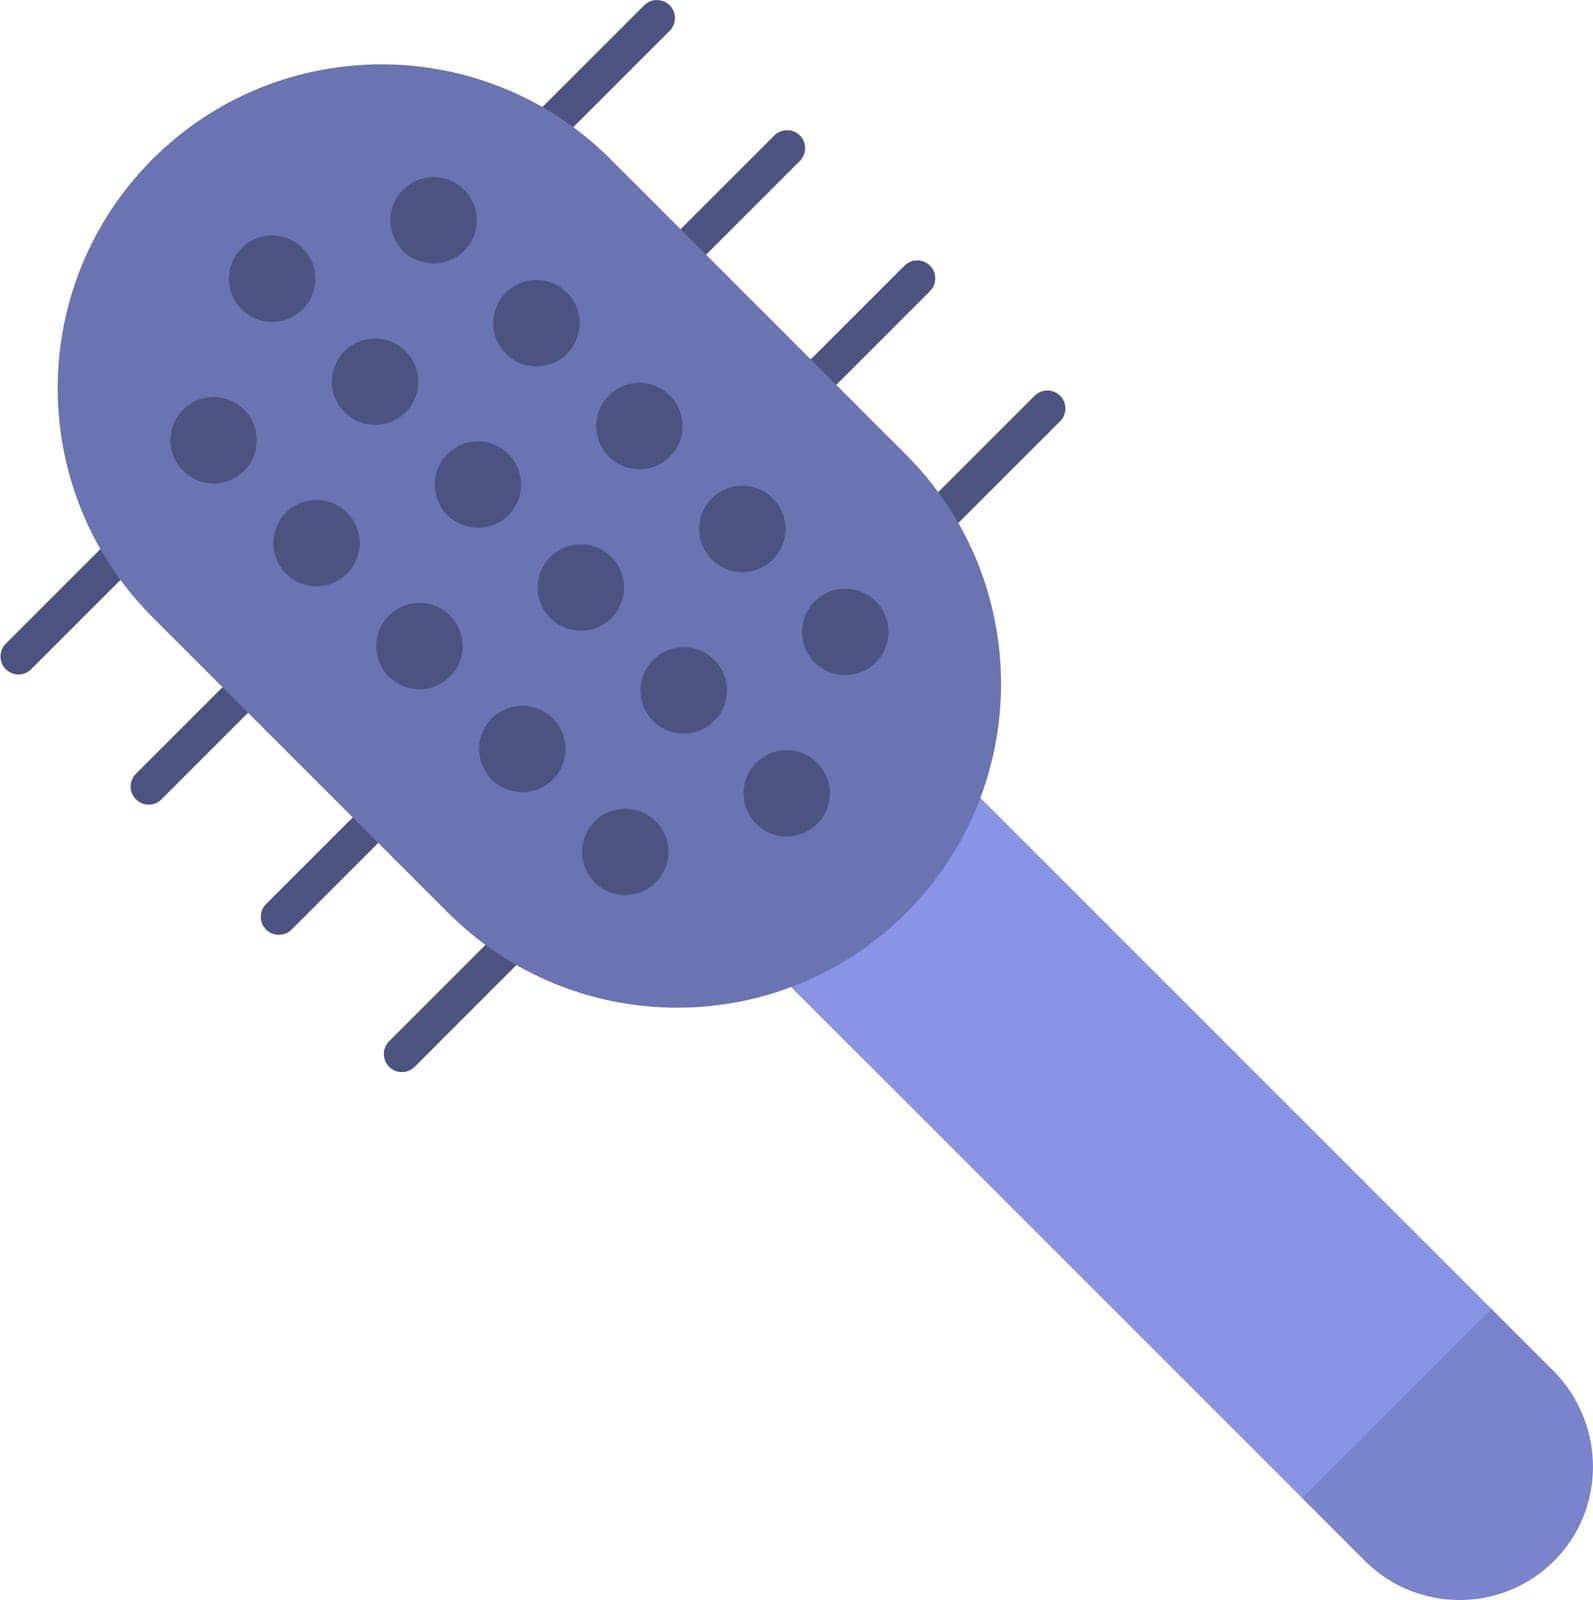 Hairbrush icon vector image. Suitable for mobile application web application and print media.